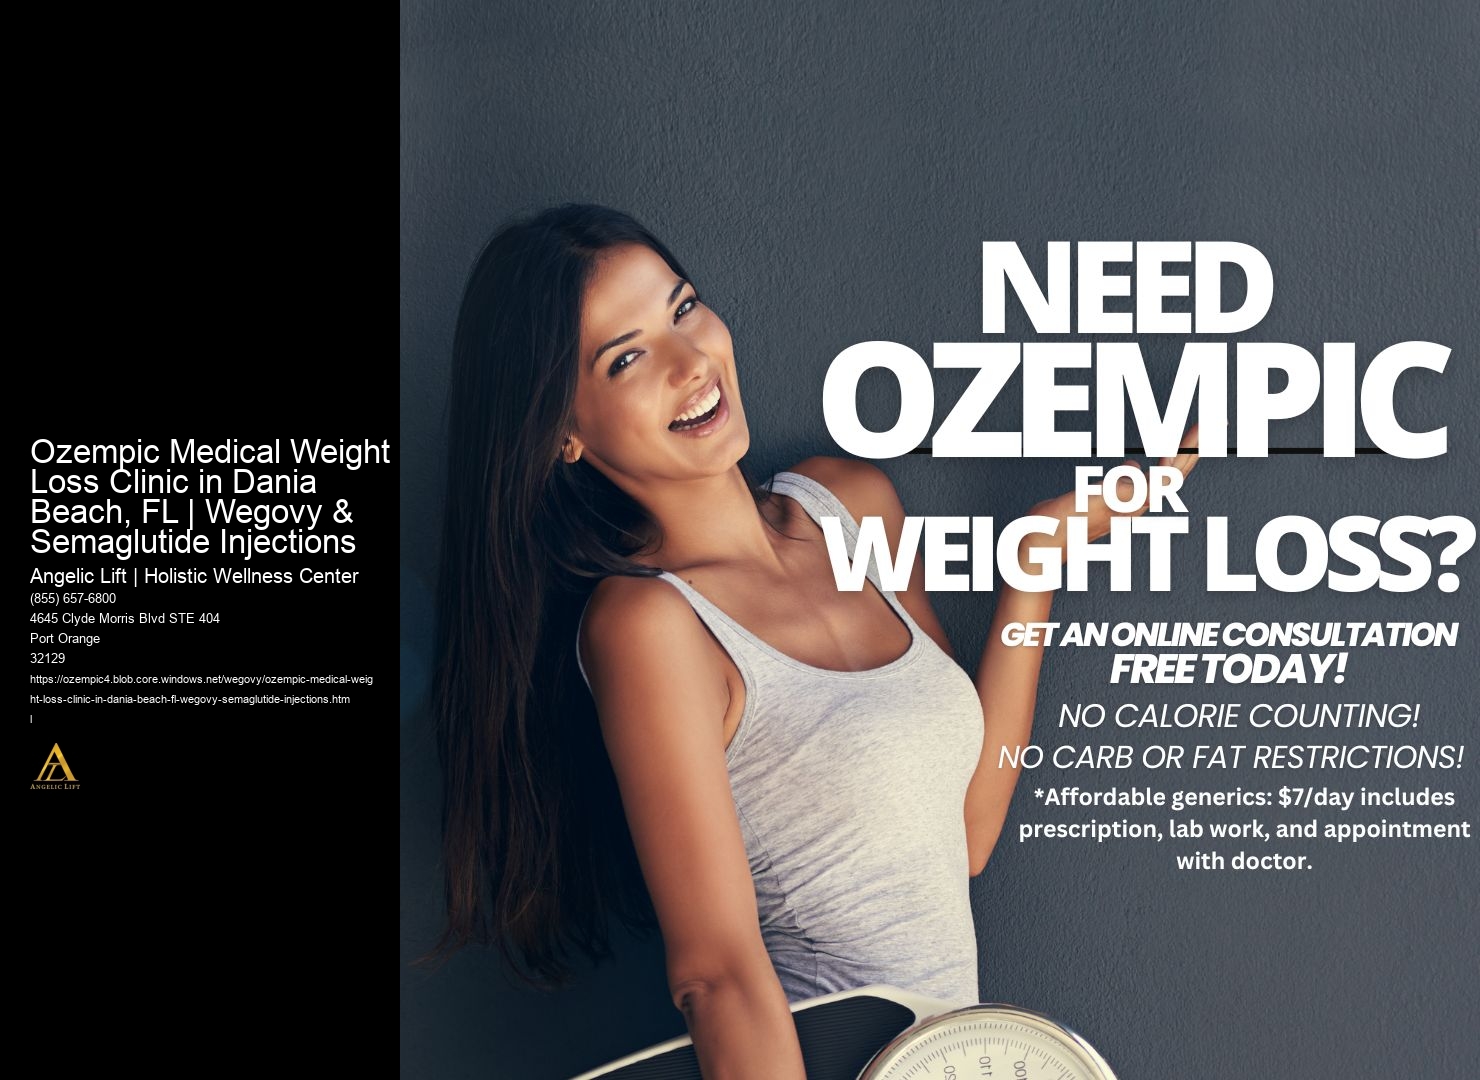 Ozempic Medical Weight Loss Clinic in Dania Beach, FL | Wegovy & Semaglutide Injections